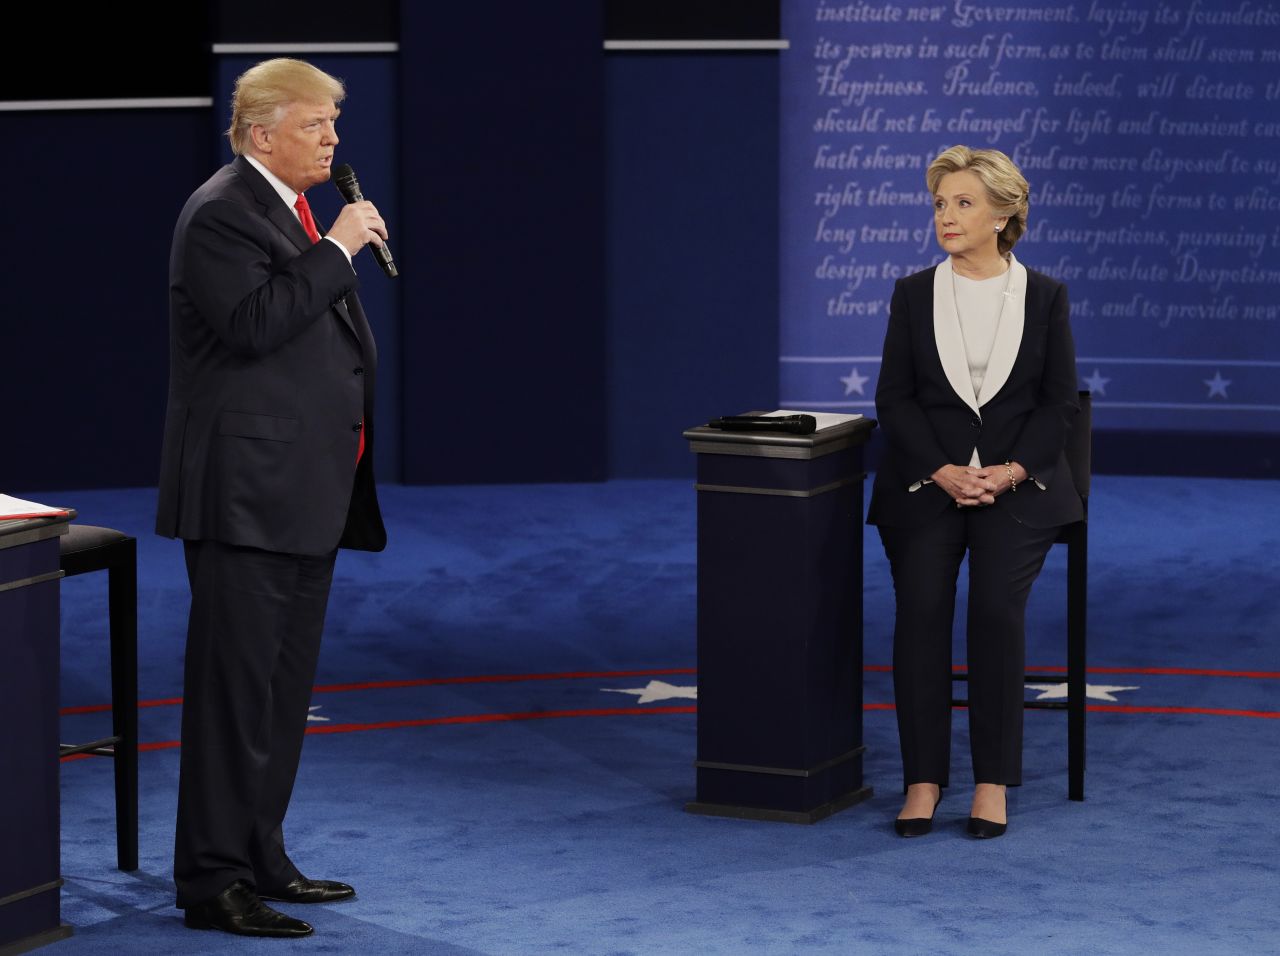 At the beginning of the debate, Trump apologized for lewd remarks he made <a href="http://www.cnn.com/2016/10/07/politics/donald-trump-women-vulgar/index.html" target="_blank">during a 2005 video</a> that surfaced last week. He called it "locker room talk" before pivoting to terrorism and "bad things happening" in the world.